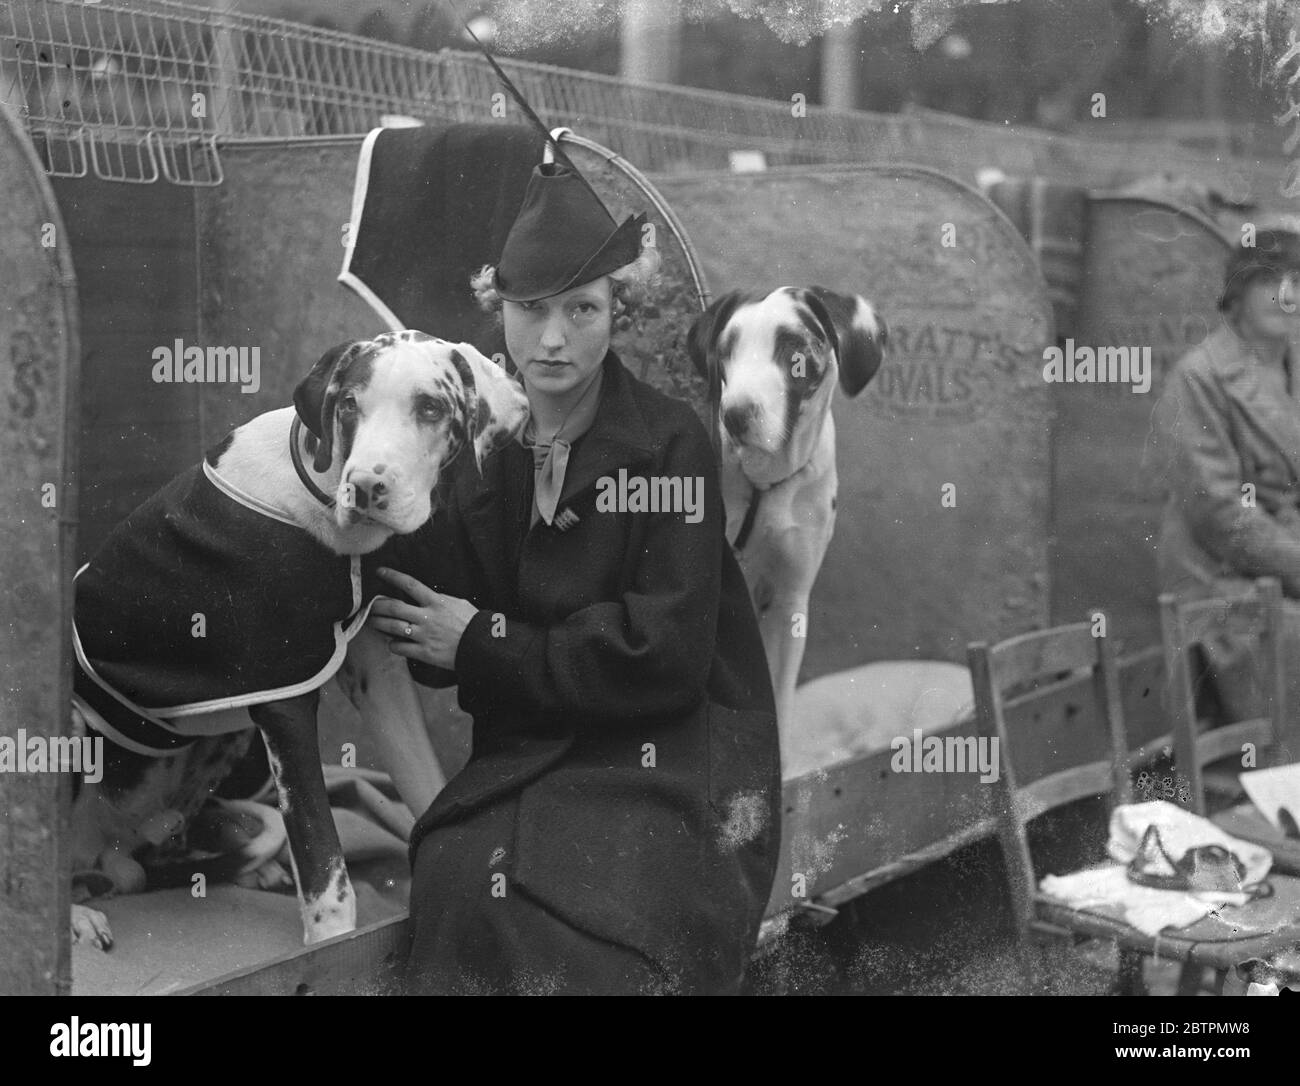 The harlequin london Black and White Stock Photos & Images - Alamy